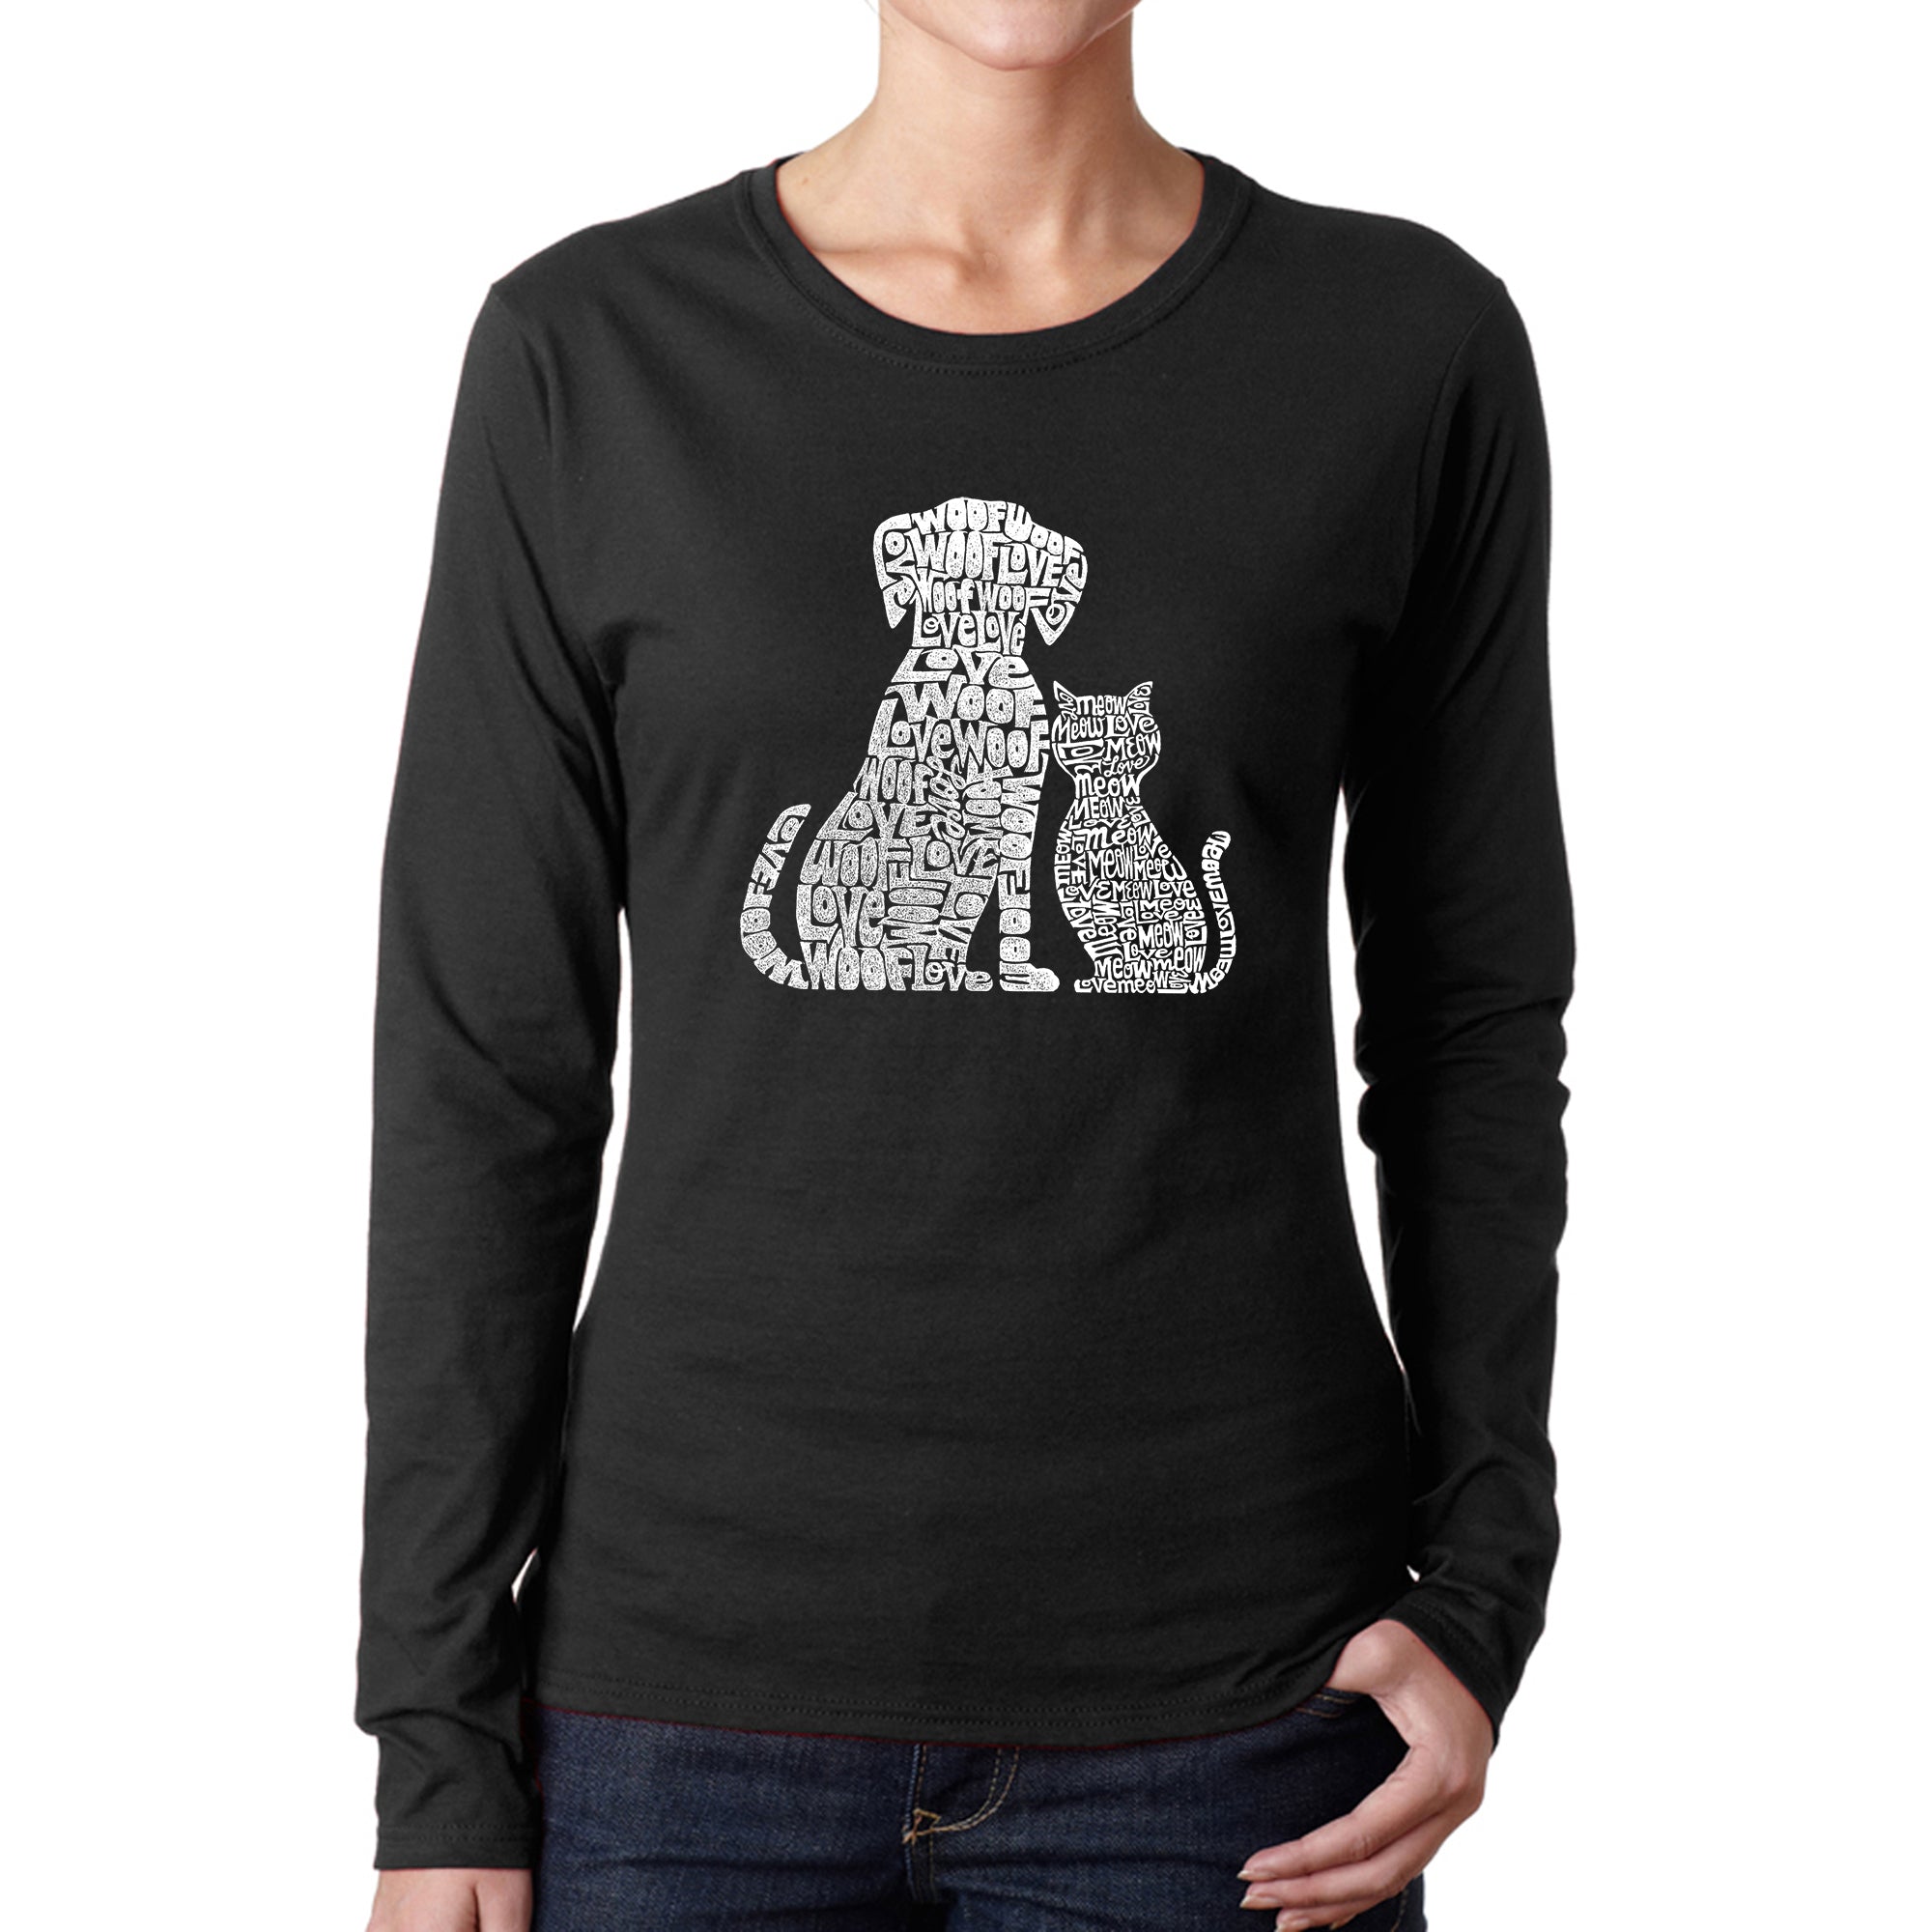 Dogs And Cats - Women's Word Art Long Sleeve T-Shirt - Black - X-Large